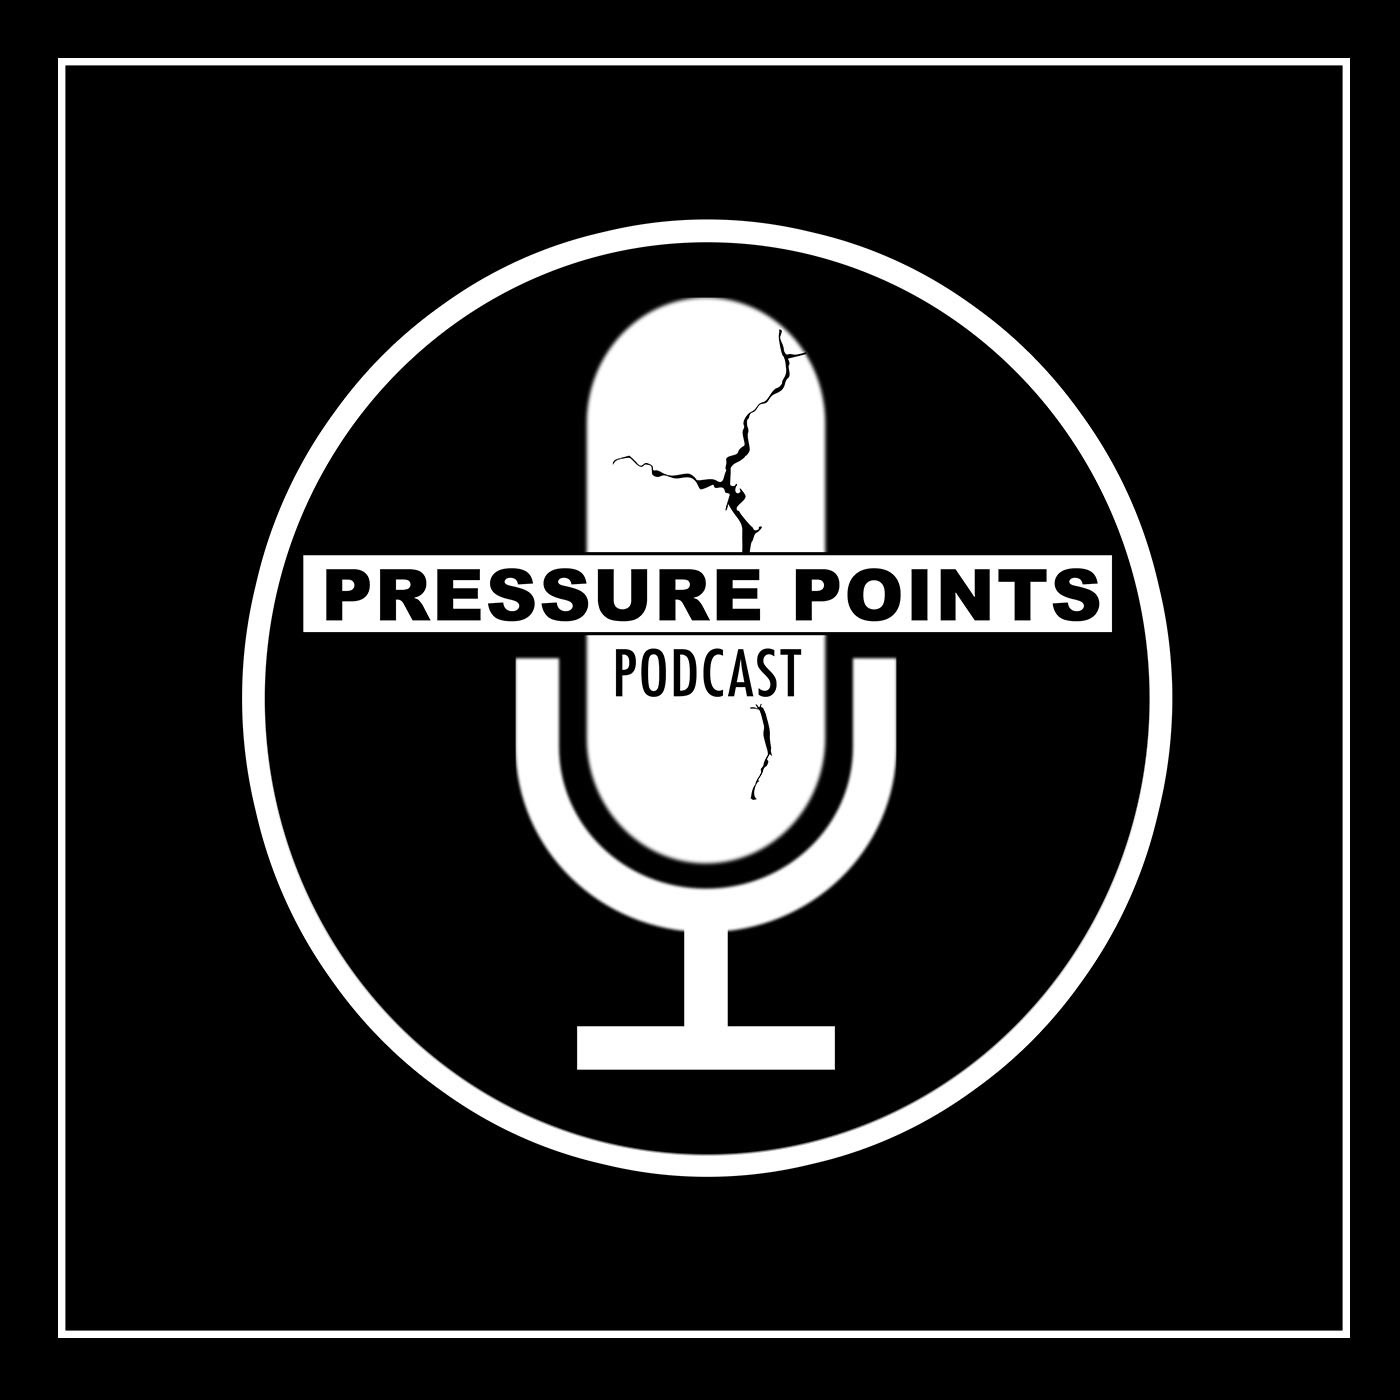 The Pressure Points Podcast